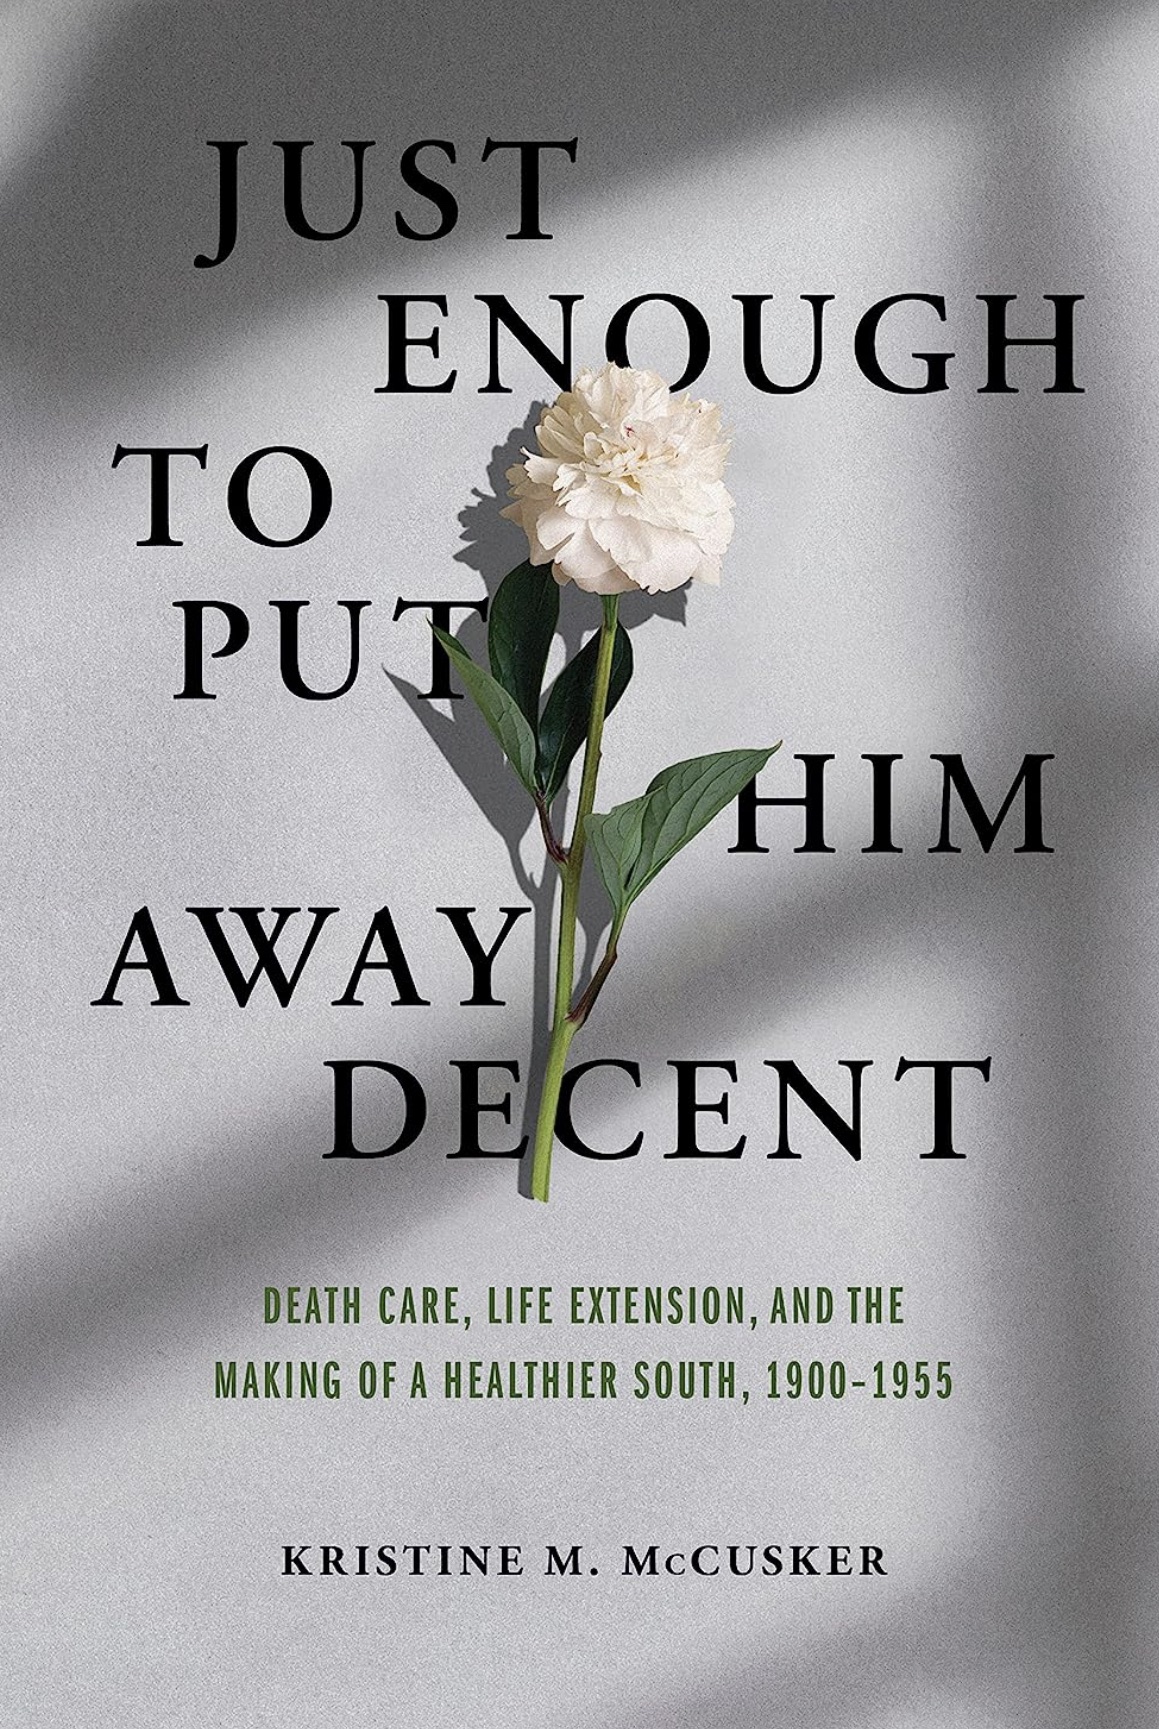 Cover for the book "Just Enough to Put Him Away Decent: Death Care, Life Extension, and the Making of a Healthier South, 1900-1955" by MTSU history professor Kristine M. McCusker (Image courtesy University of Illinois Press)